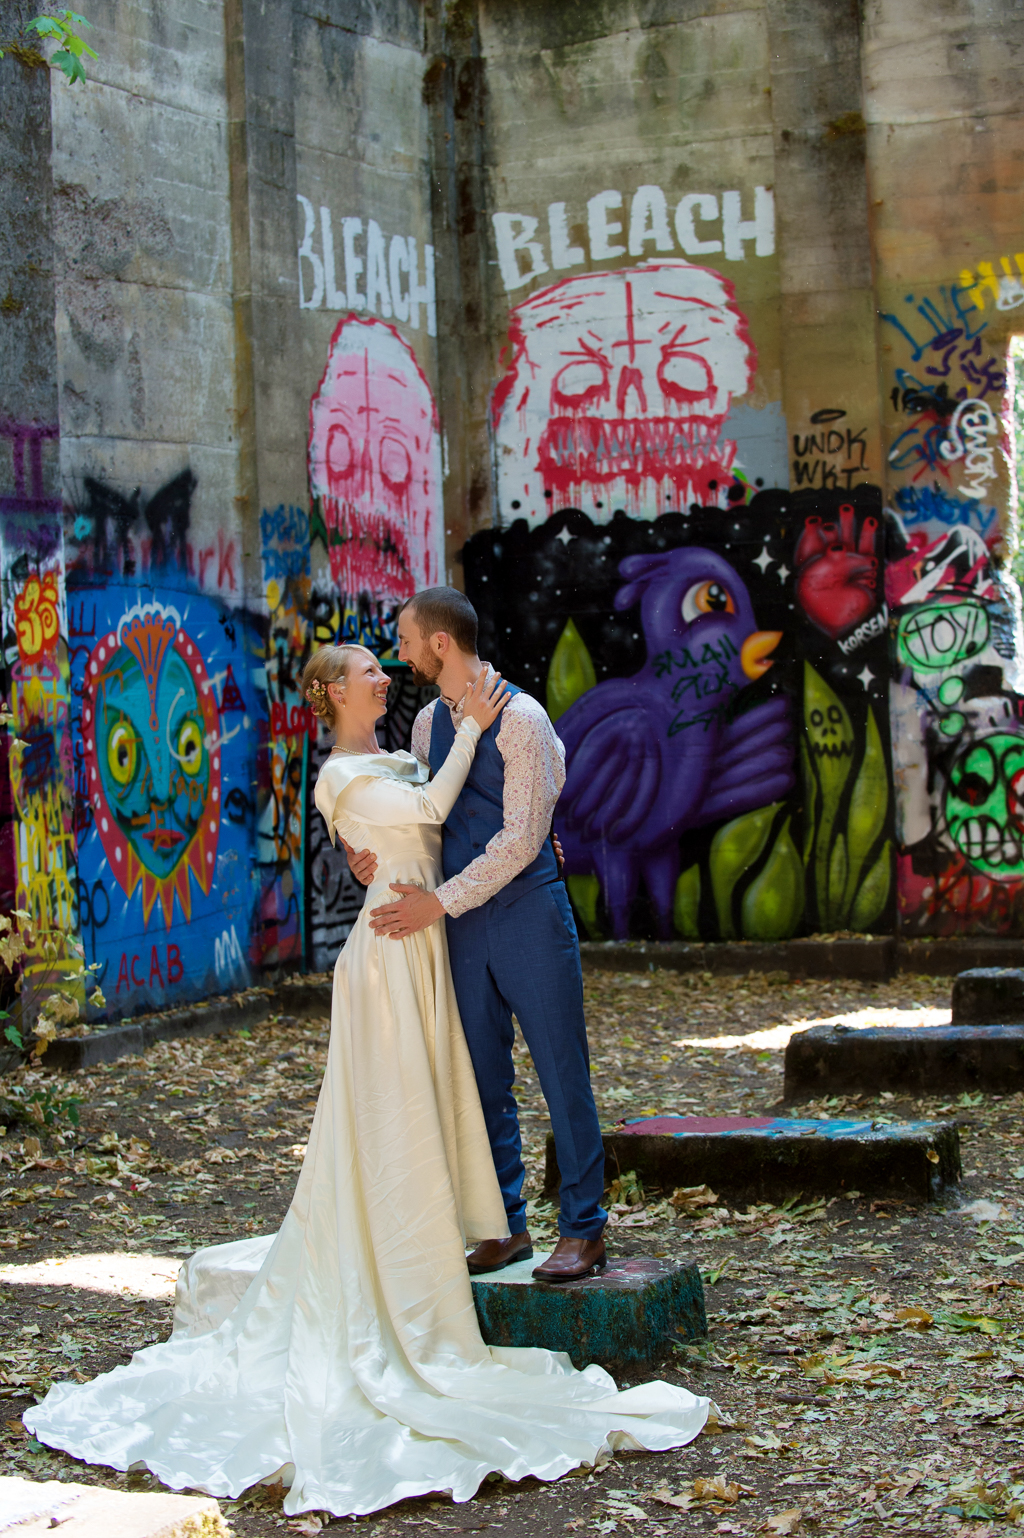 A bride and groom look at each other in a graffiti covered mill